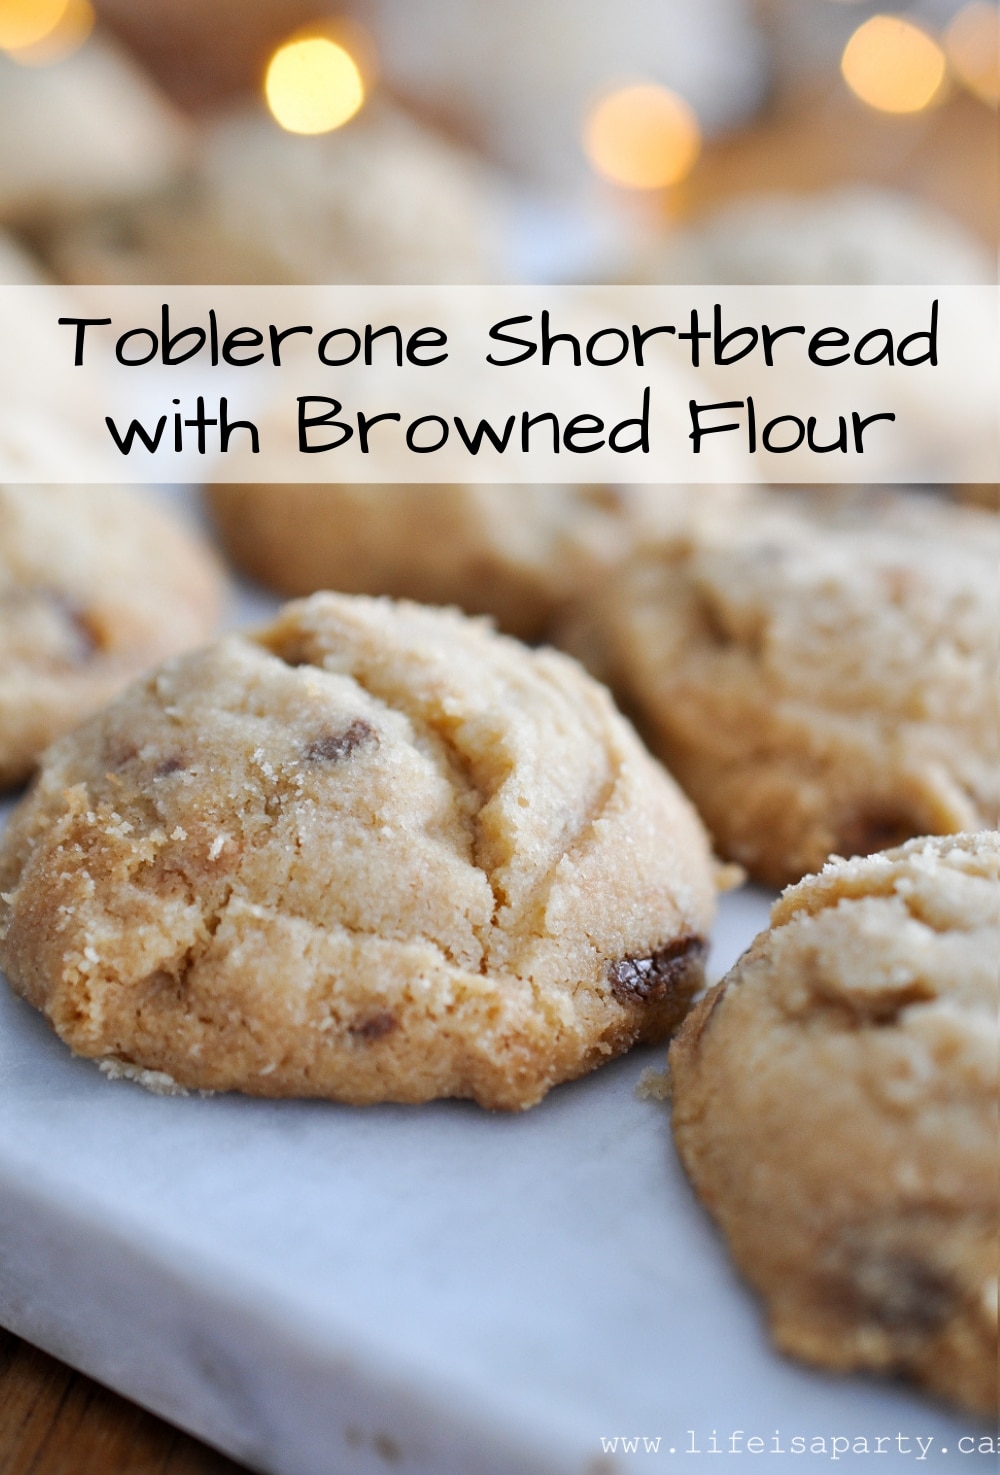 Toblerone Shortbread with Browned Flour -The "Famous Phipps Shortbread" with roasted flour, and Toblerone chocolate bar chunks.